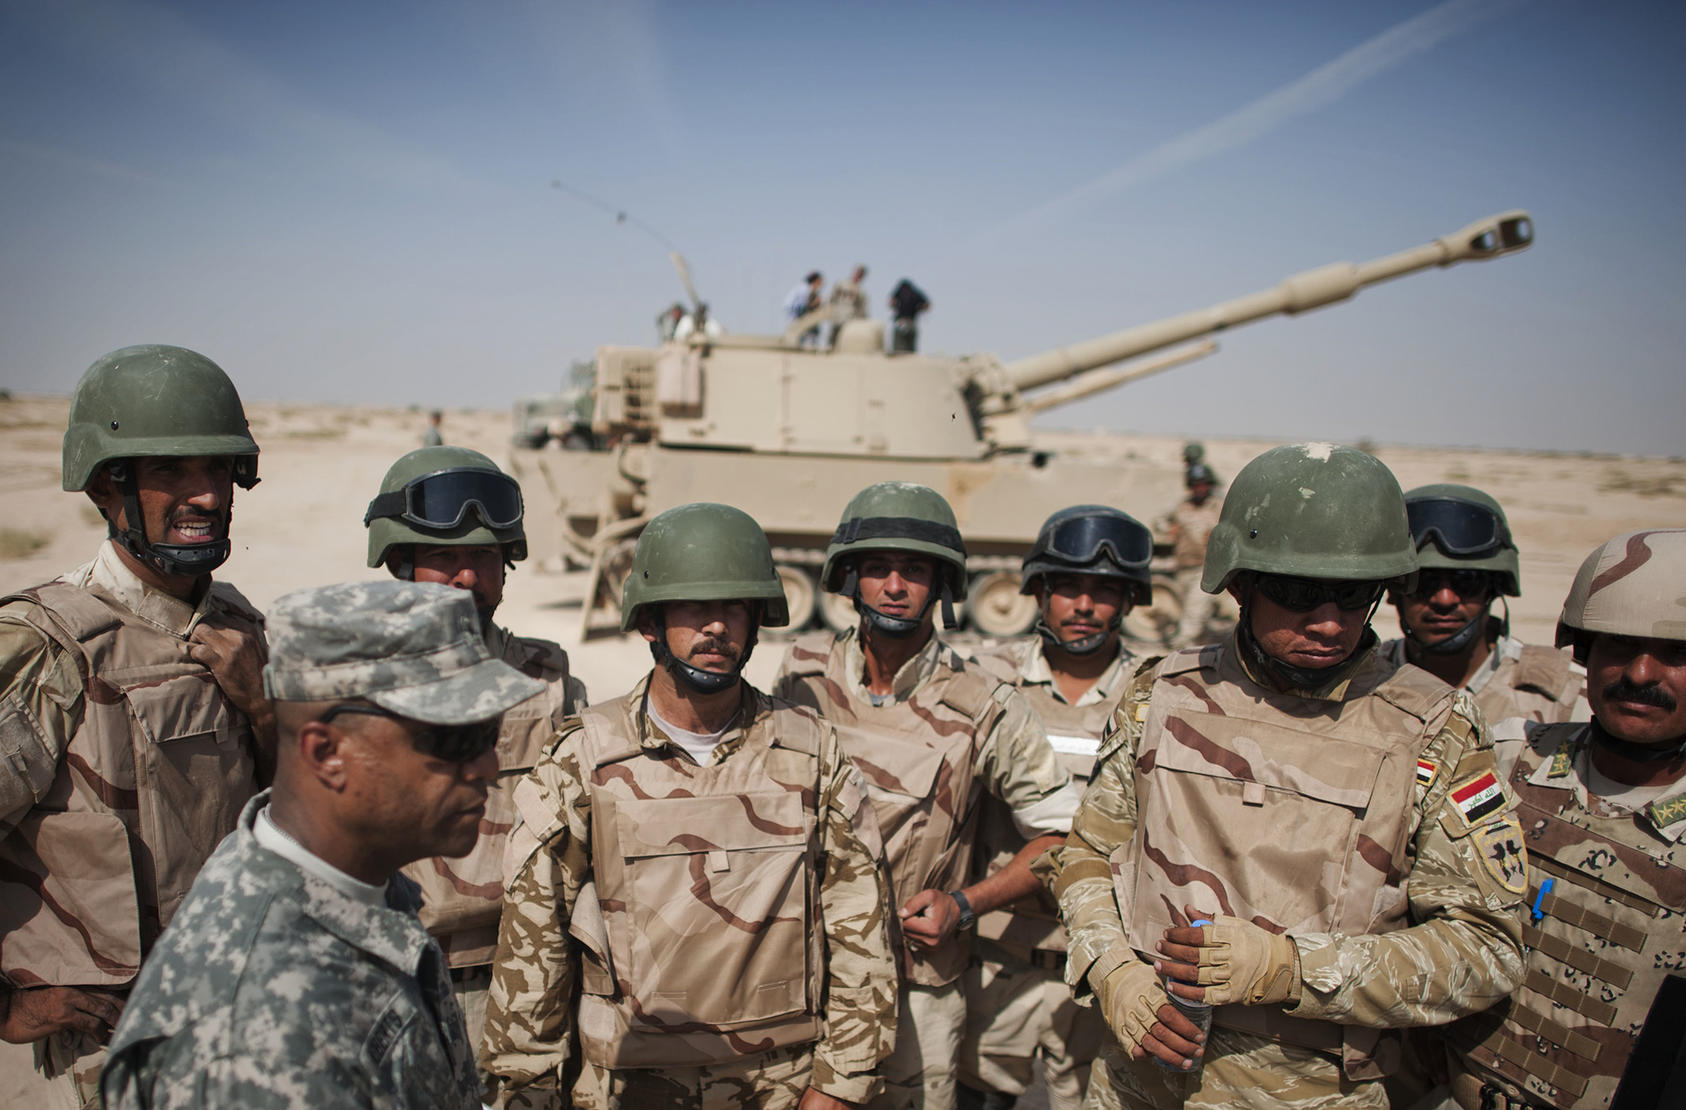 The U.S. military organizes a demonstration at the Iraqi Armor School after the Iraqi soldiers completed a 21-day tank training course, in Besmaya, Iraq, Oct. 18, 2011. (Andrea Bruce/The New York Times)